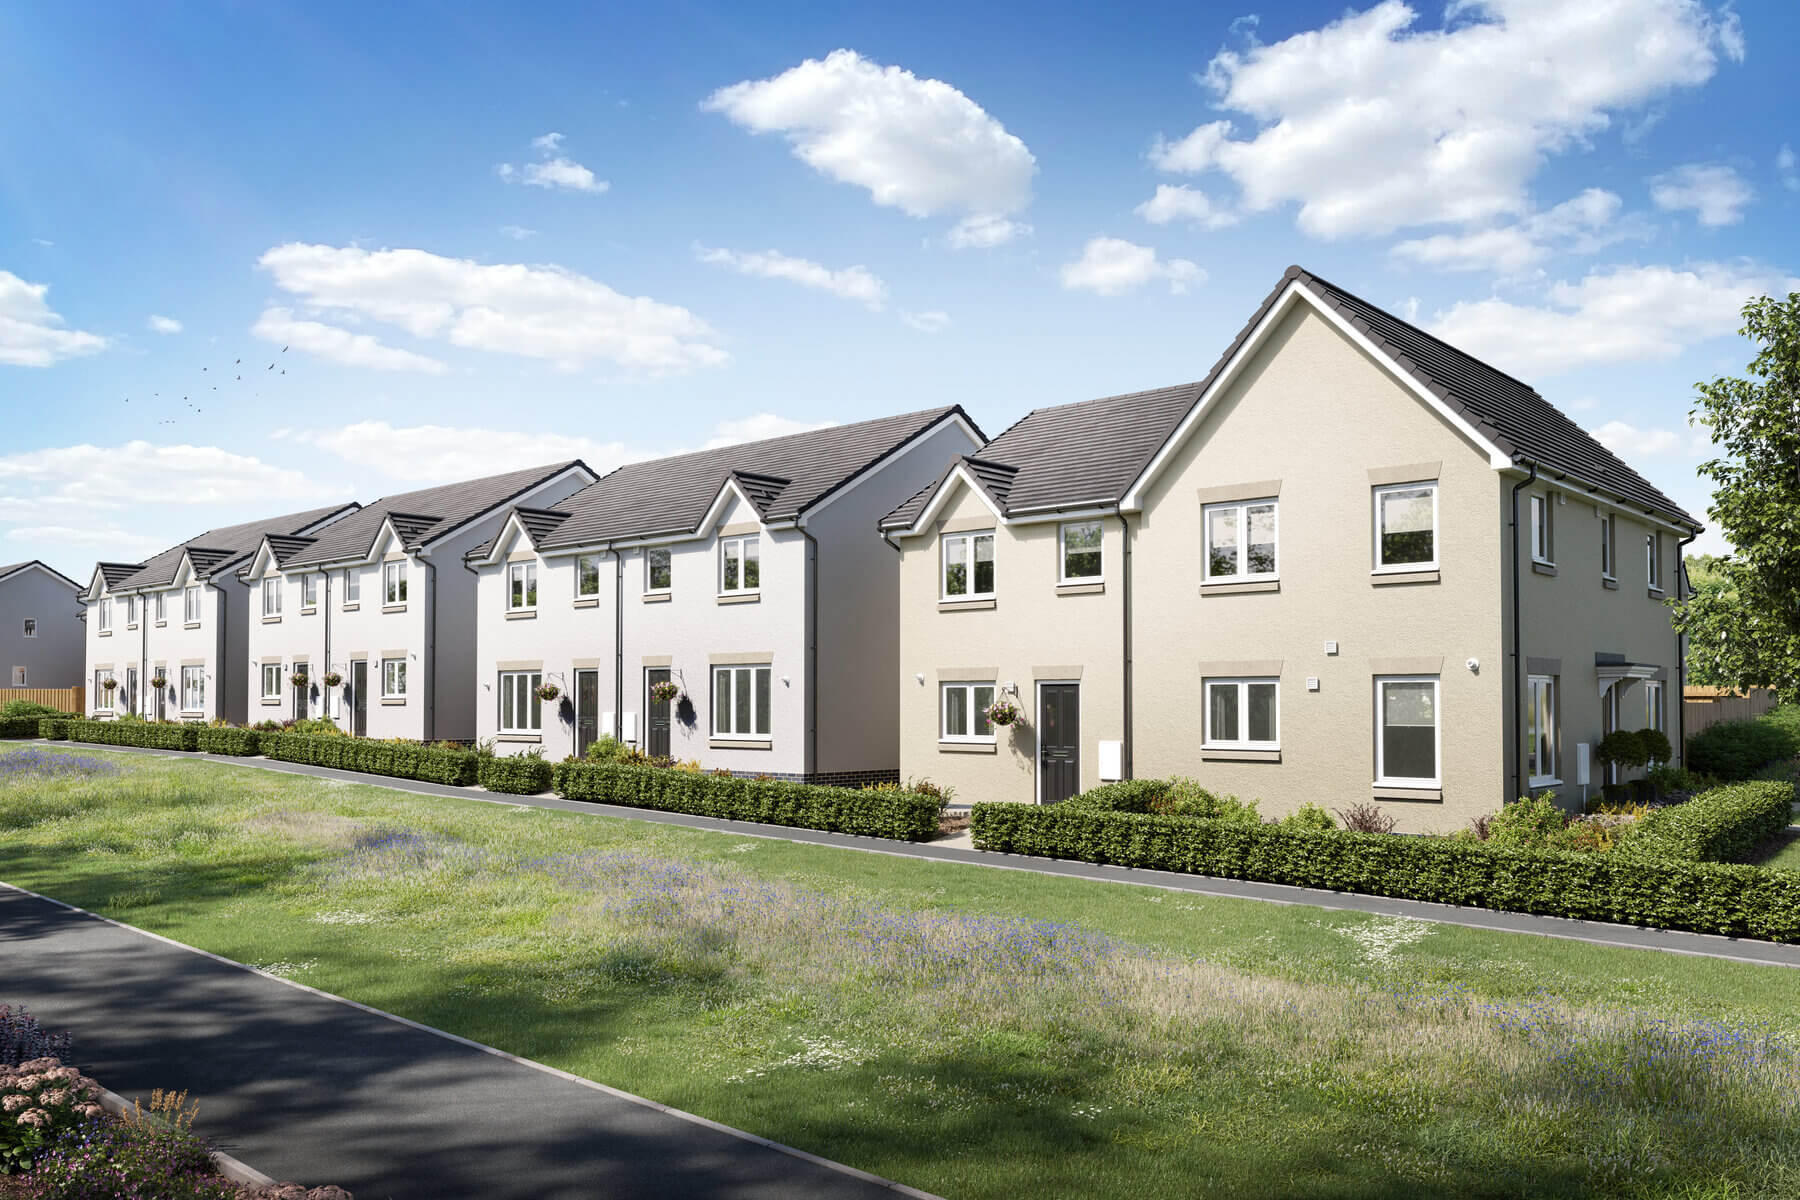 Taylor Wimpey acquires land for approved Winchburgh development